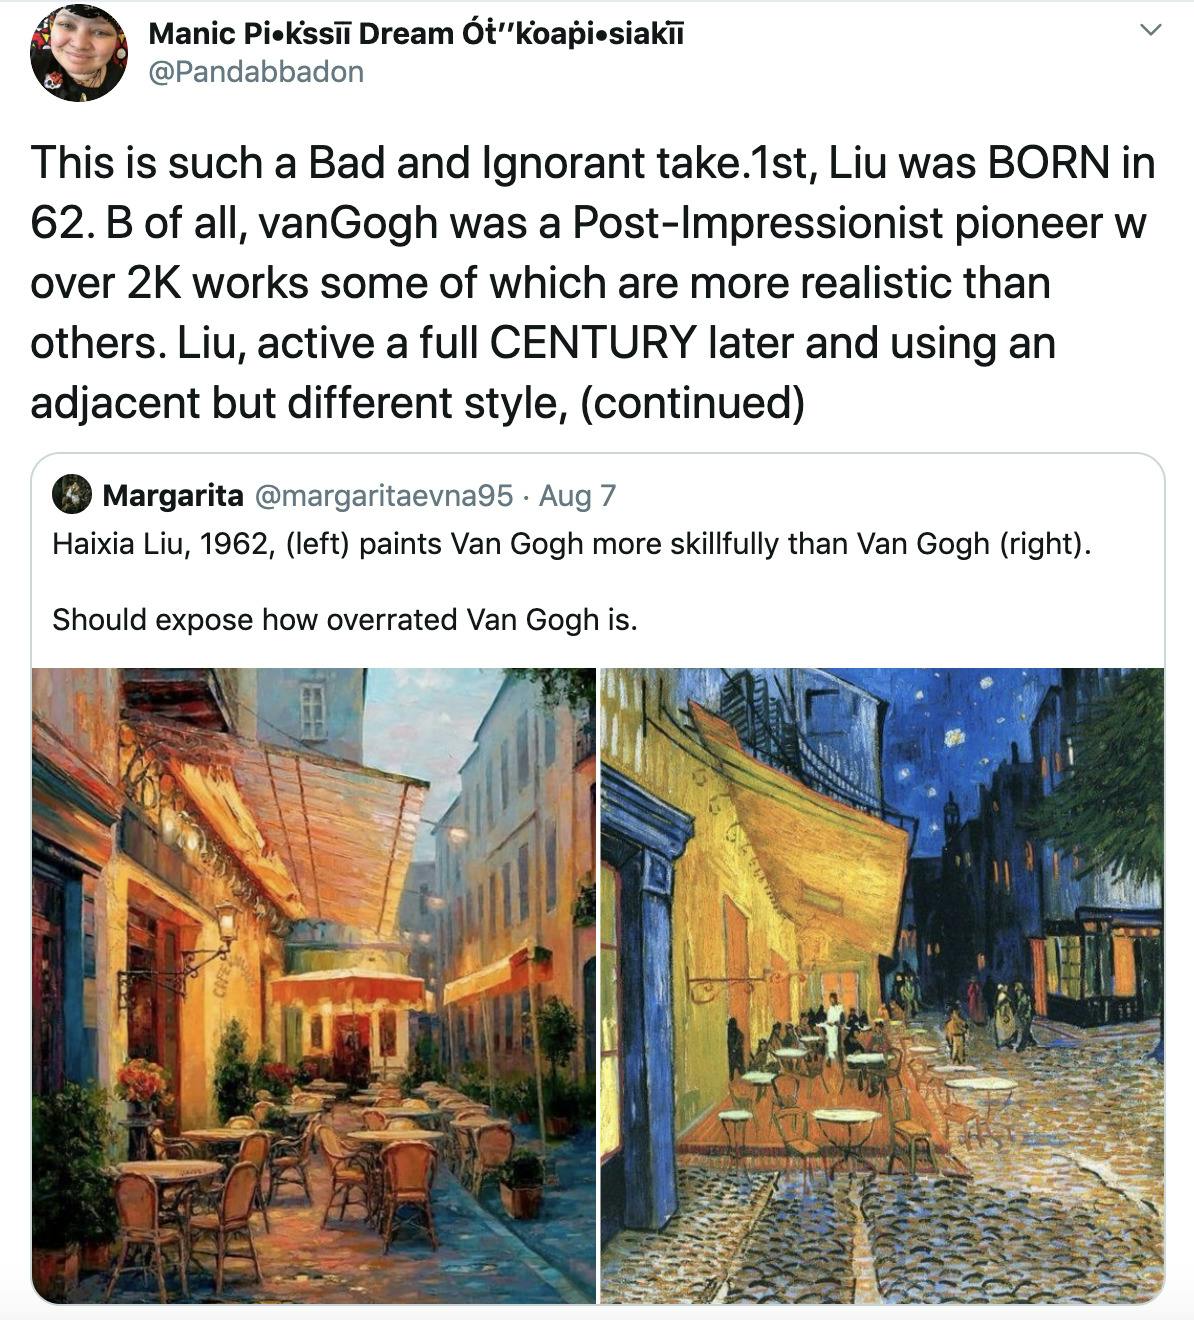 This is such a Bad and Ignorant take.1st, Liu was BORN in 62. B of all, vanGogh was a Post-Impressionist pioneer w over 2K works some of which are more realistic than others. Liu, active a full CENTURY later and using an adjacent but different style, (continued)